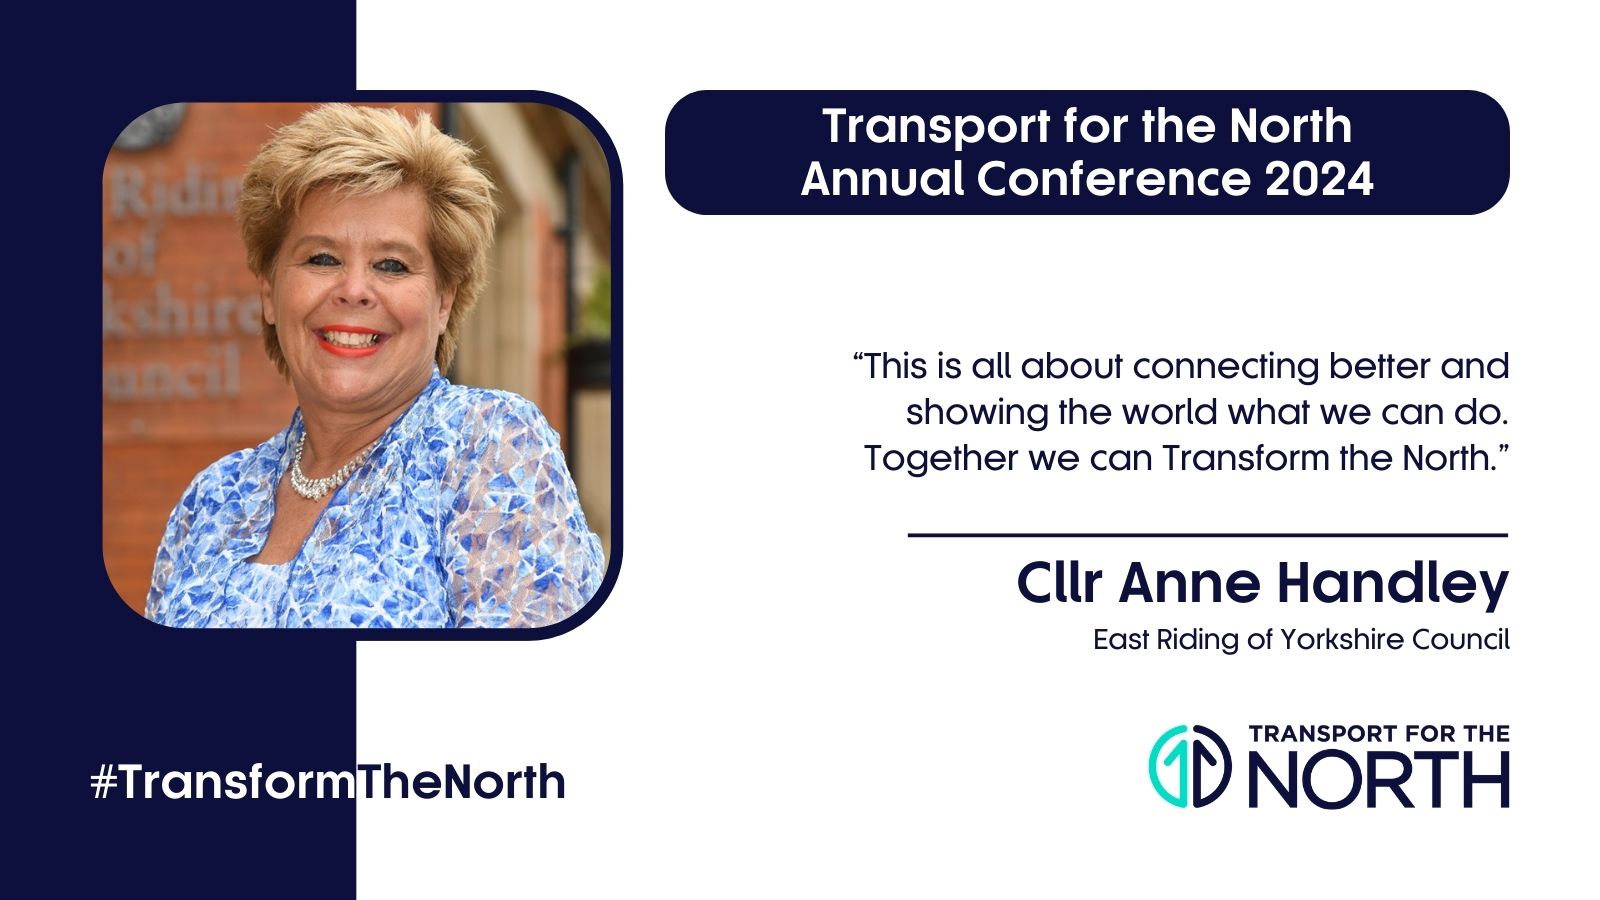 Cllr Anne Handley discusses how we can Transform the North